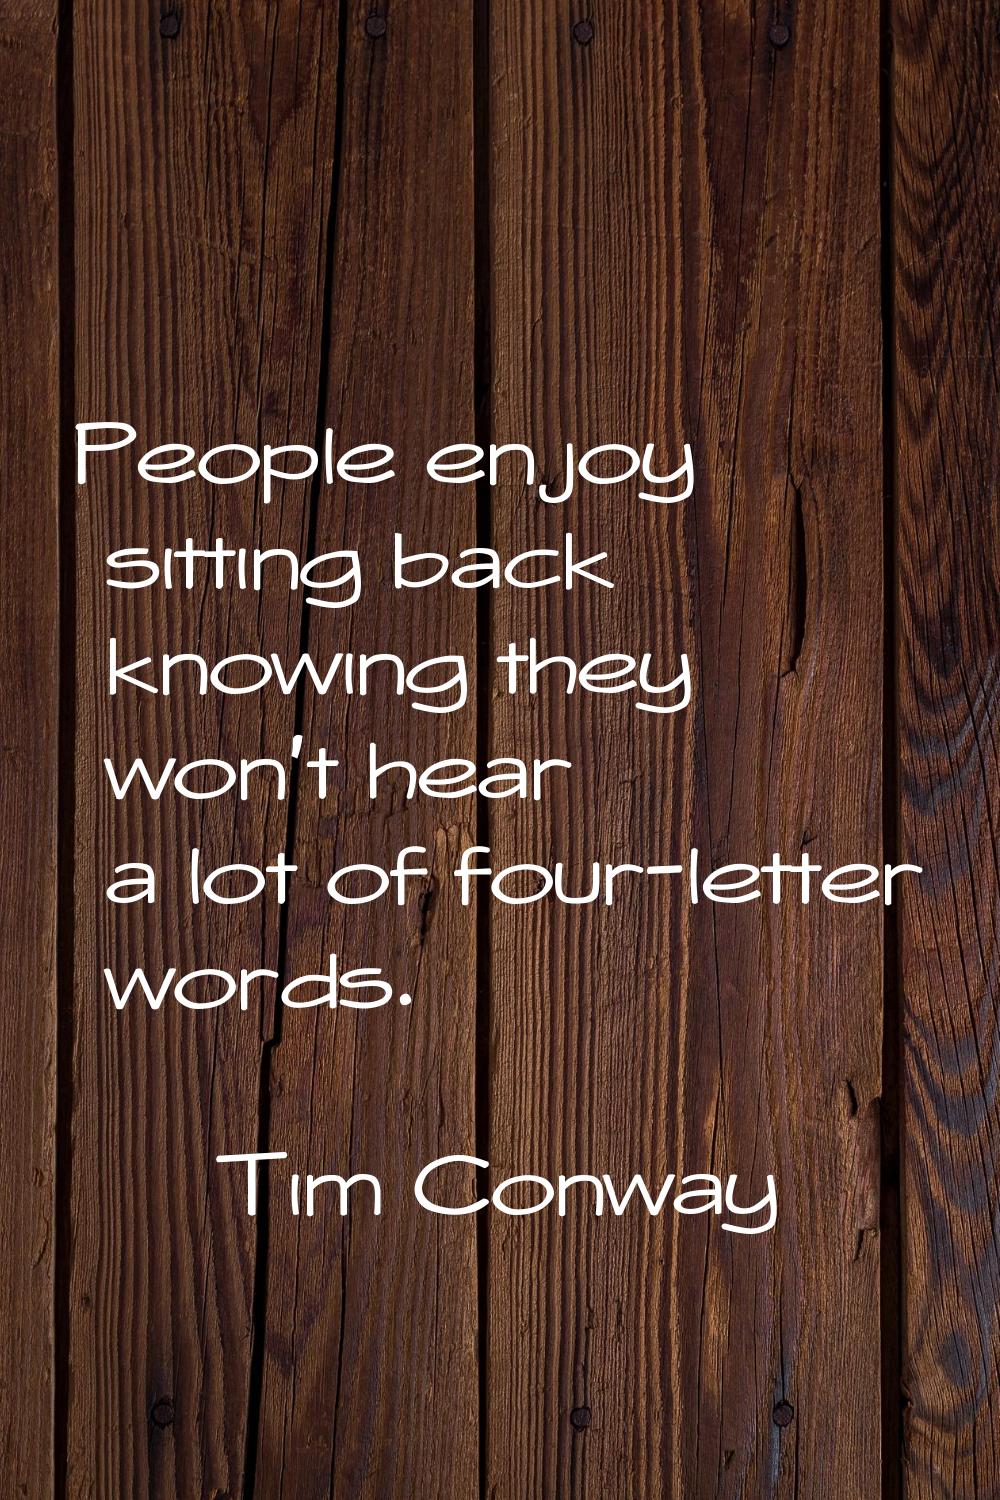 People enjoy sitting back knowing they won't hear a lot of four-letter words.